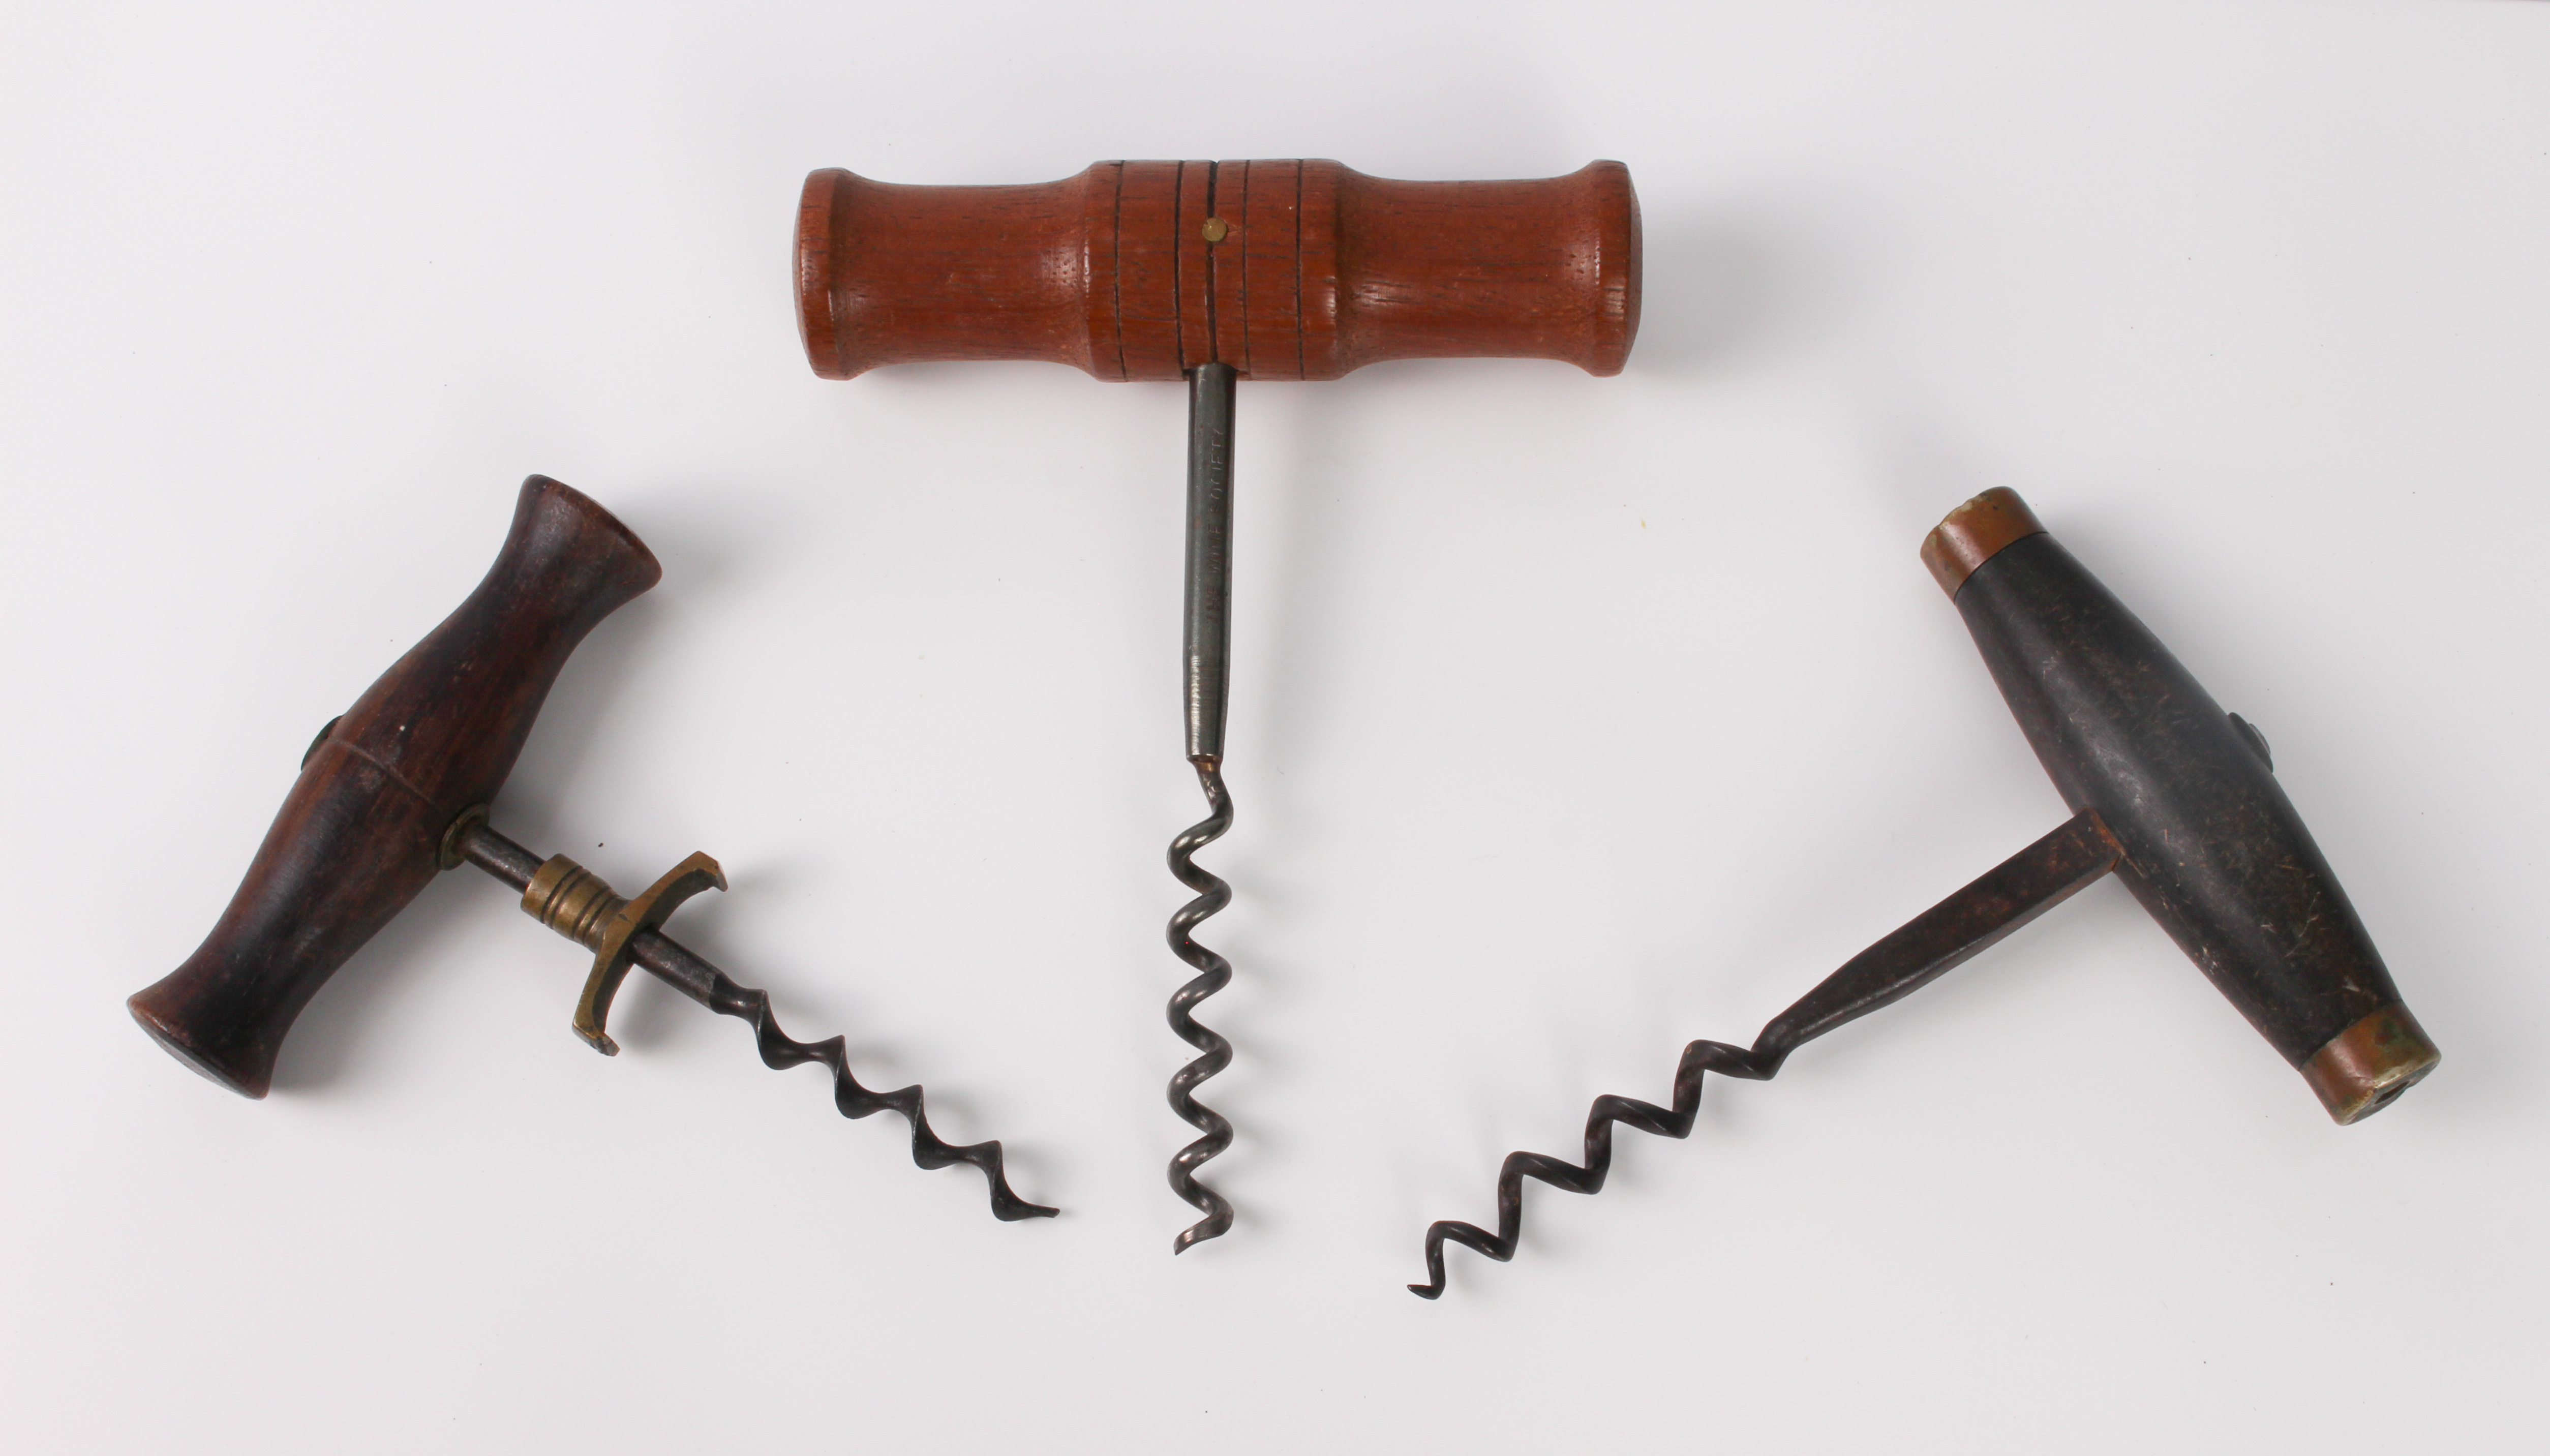 Two antique corkscrews - one with turned rosewood handle, brass collar and speed worm helix, 11.4 cm